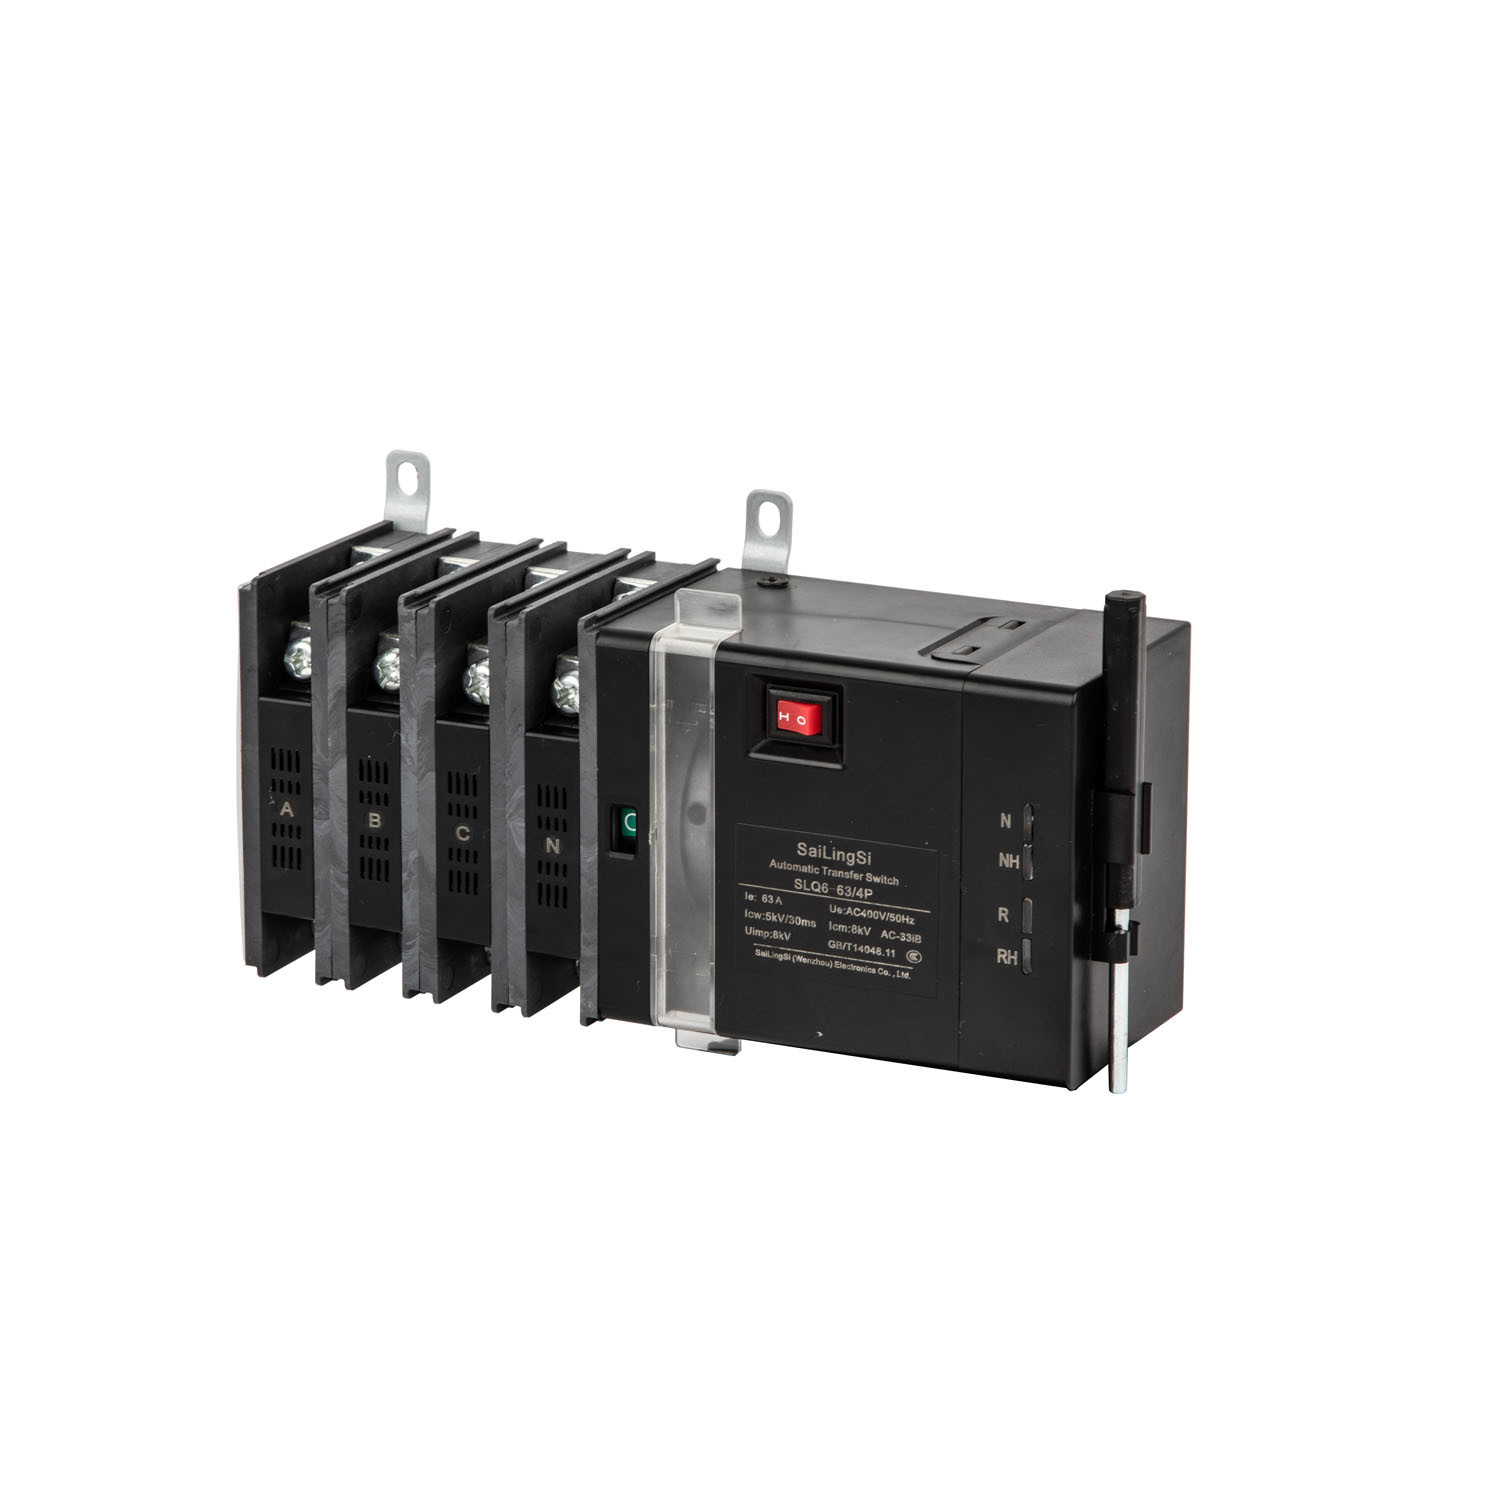 Solar Power to City Power ATS 63A 4p Automatic Transfer Switch ATS with Fire Control